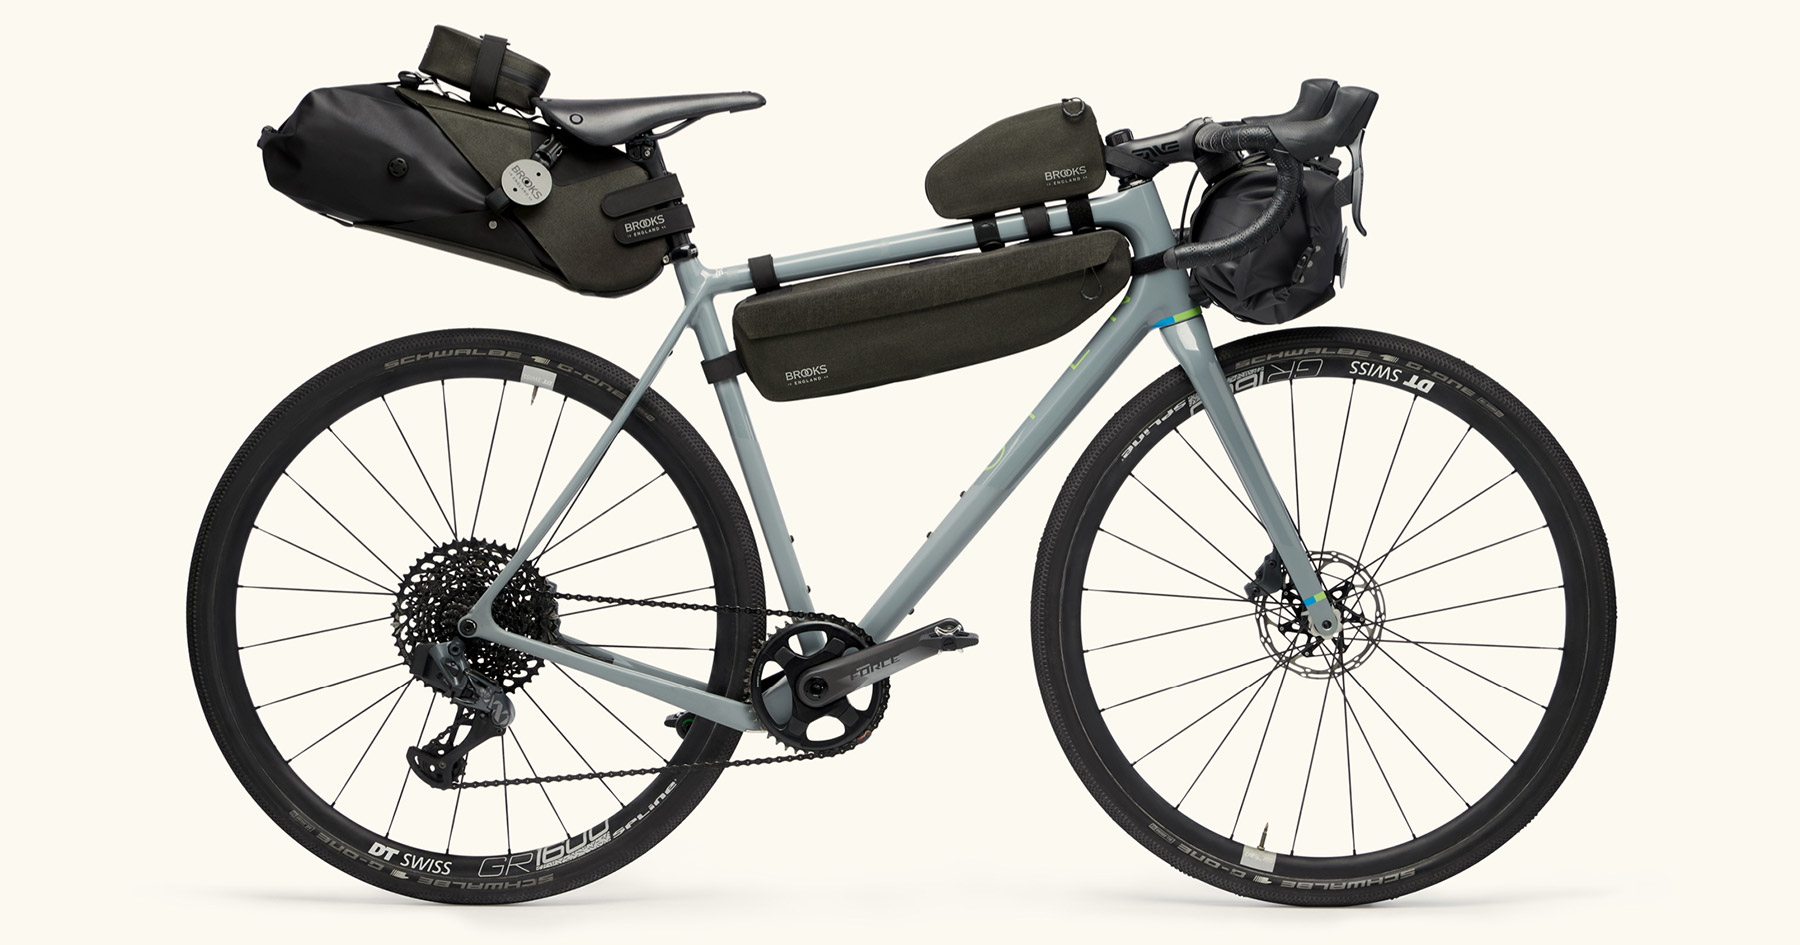 Brooks Scape Bikepacking Bags and 